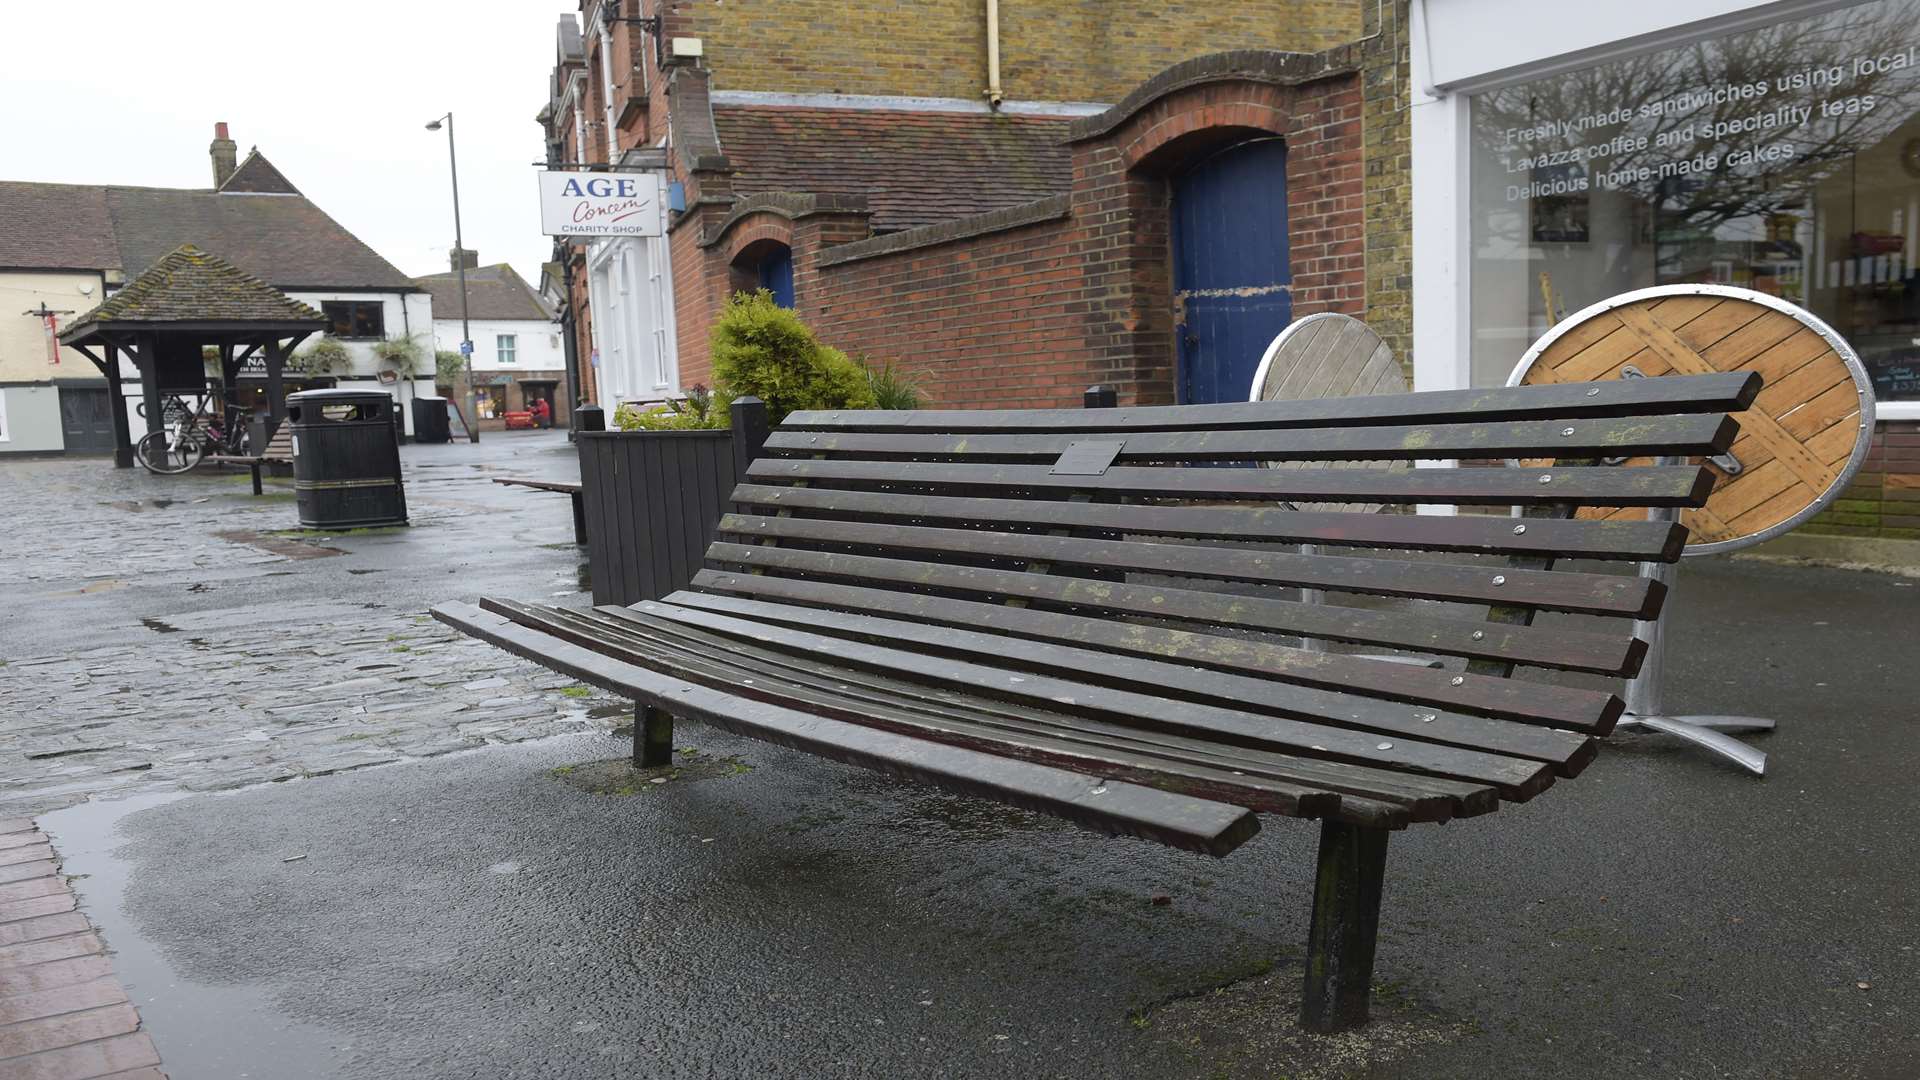 Memorial benches will be "sympathetically relocated" in the town.